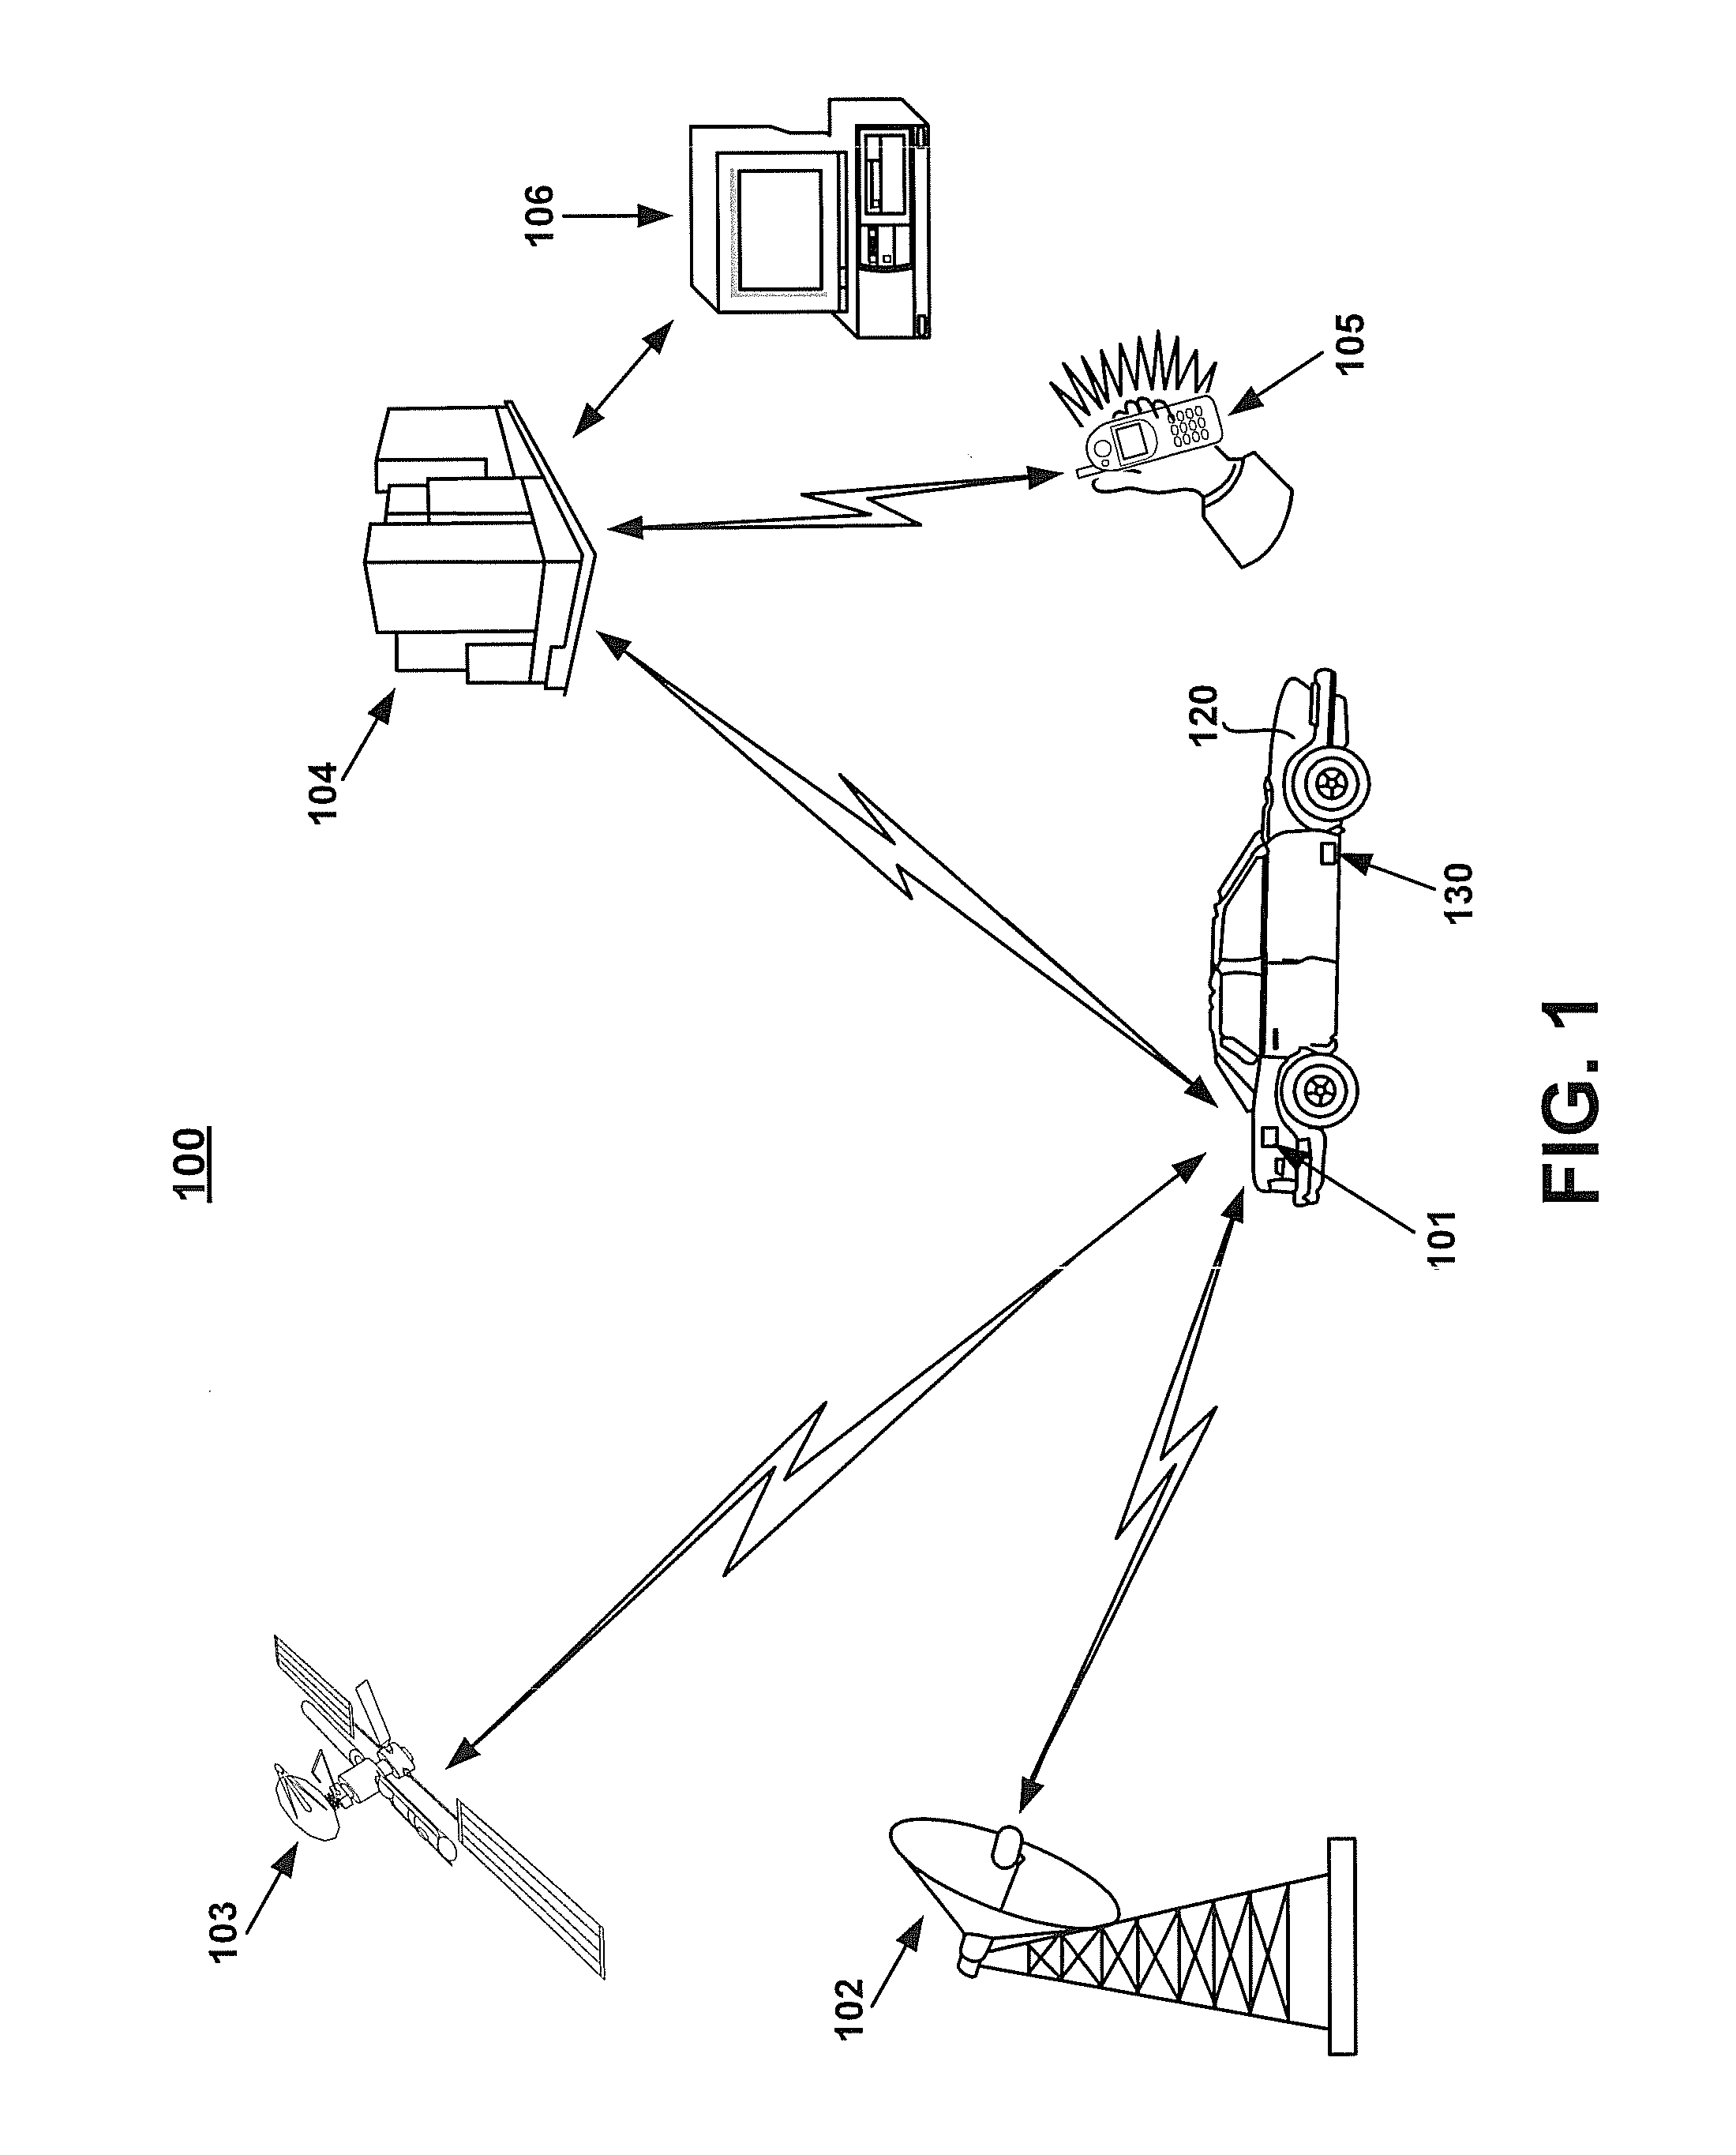 Portable motion-activated position reporting device